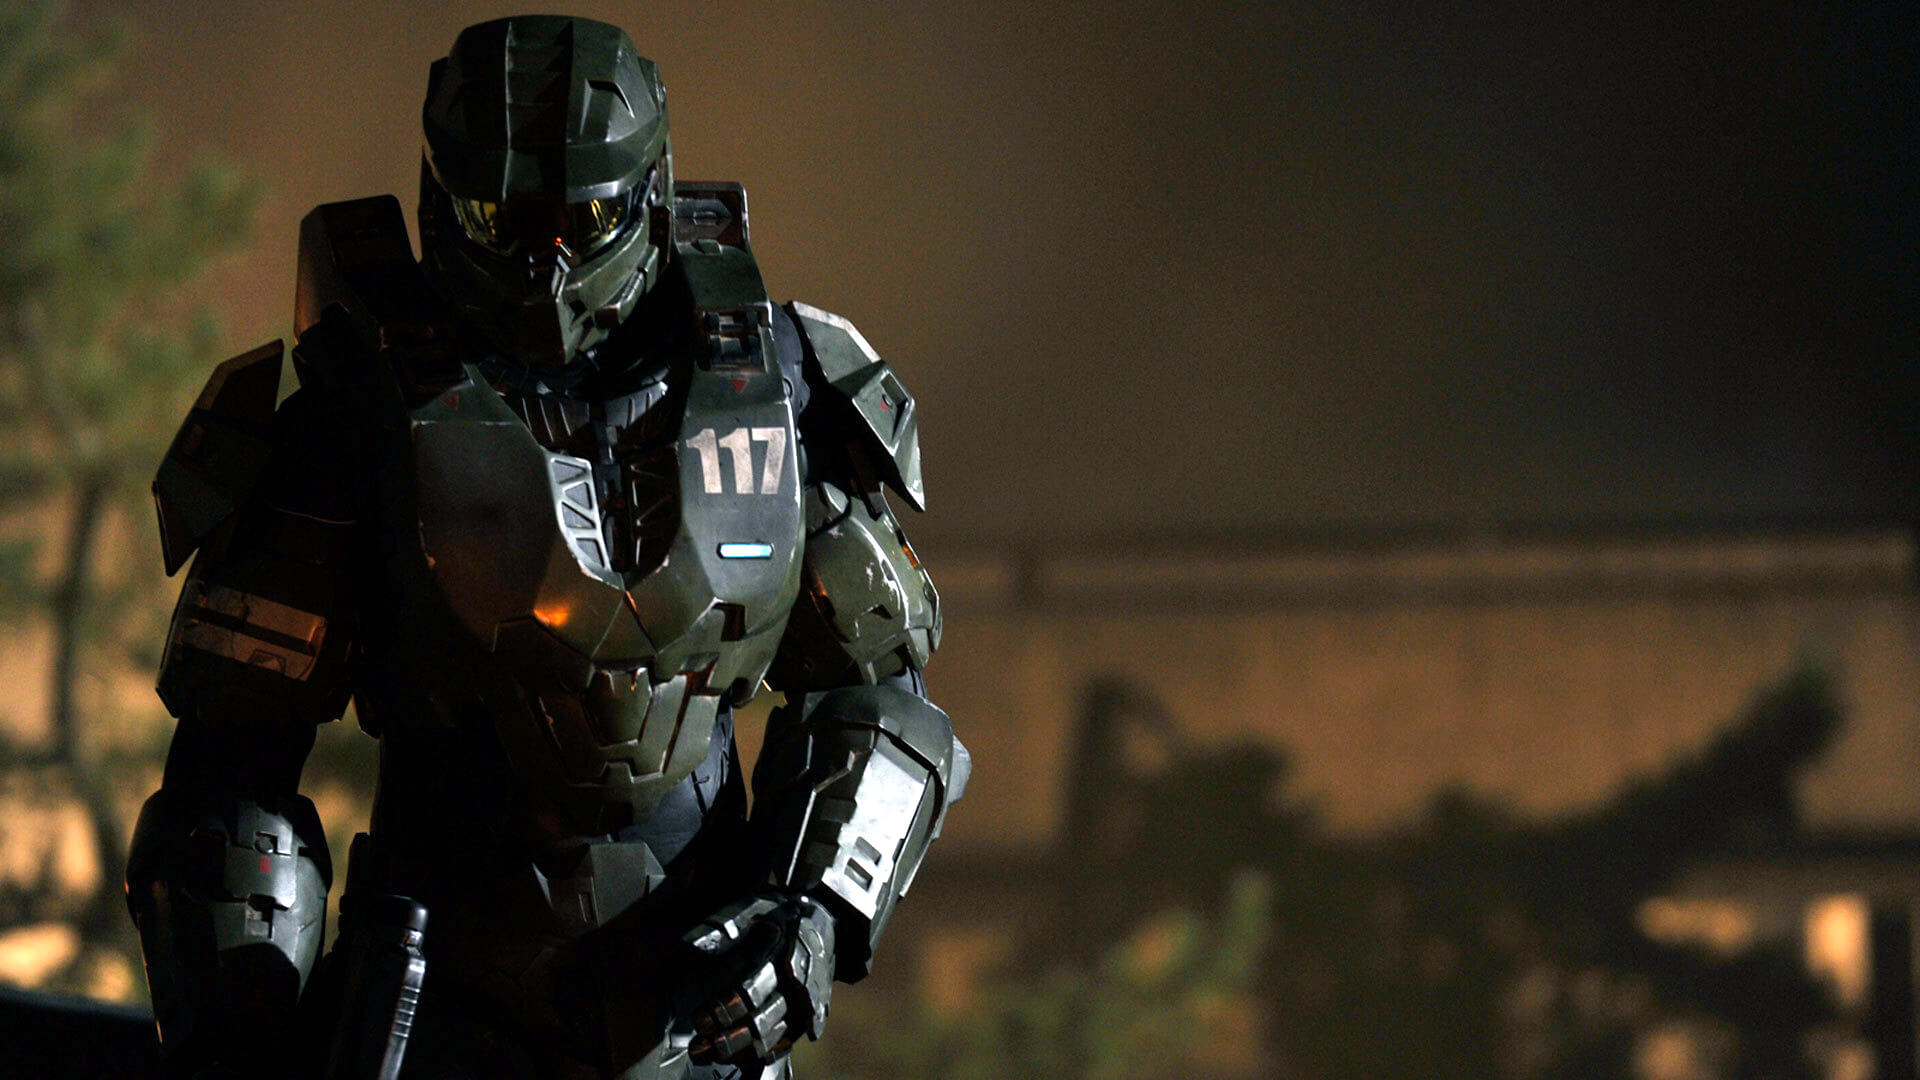 The Live Action Halo TV Series is Still in Development